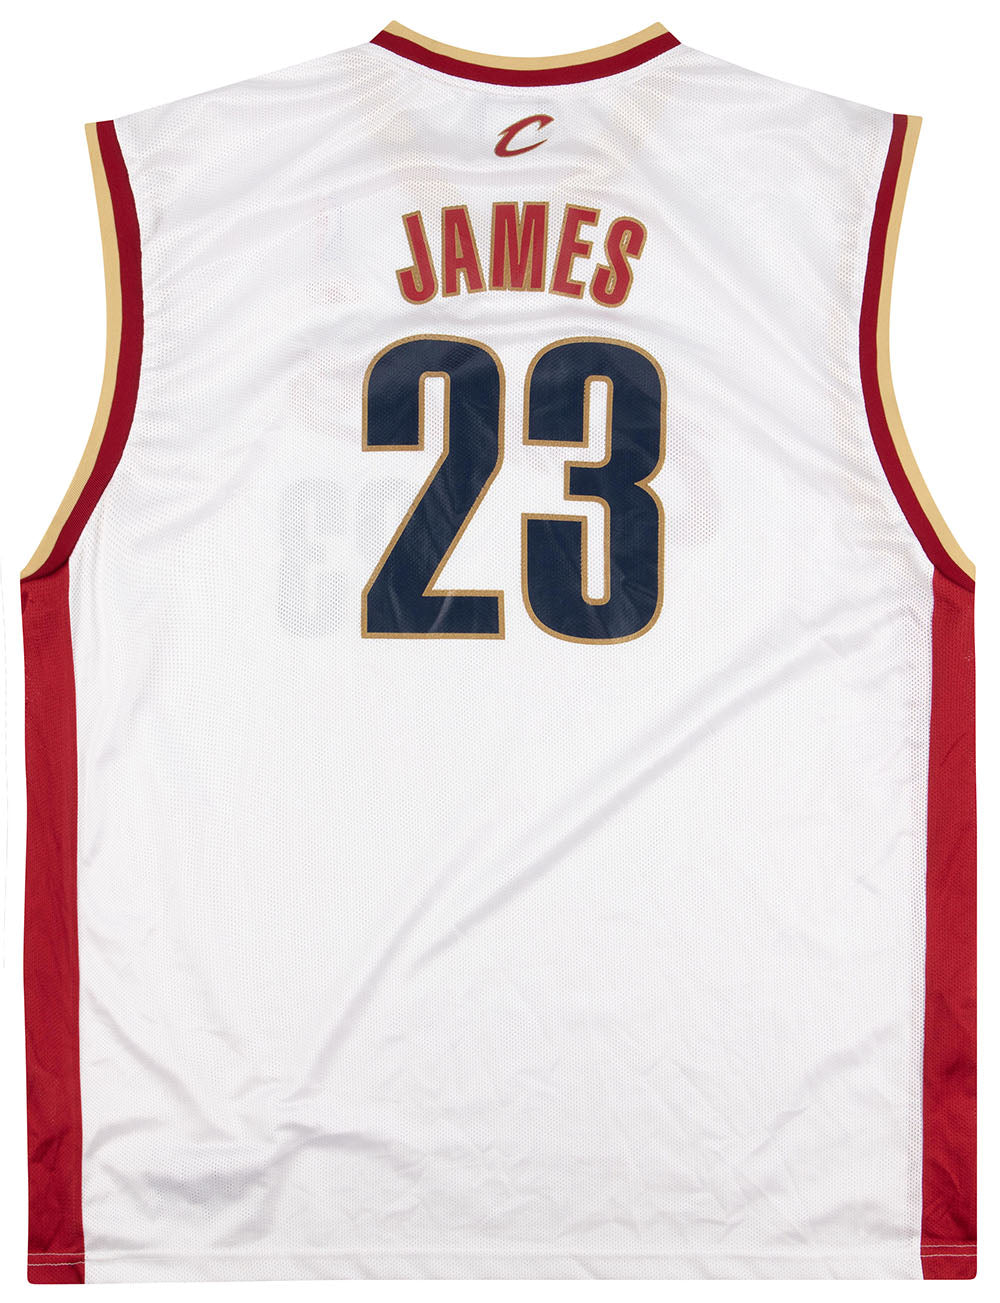 Lebron James #23 Cleveland Cavs White Away Rookie Jersey NBA Authentic  youth XL